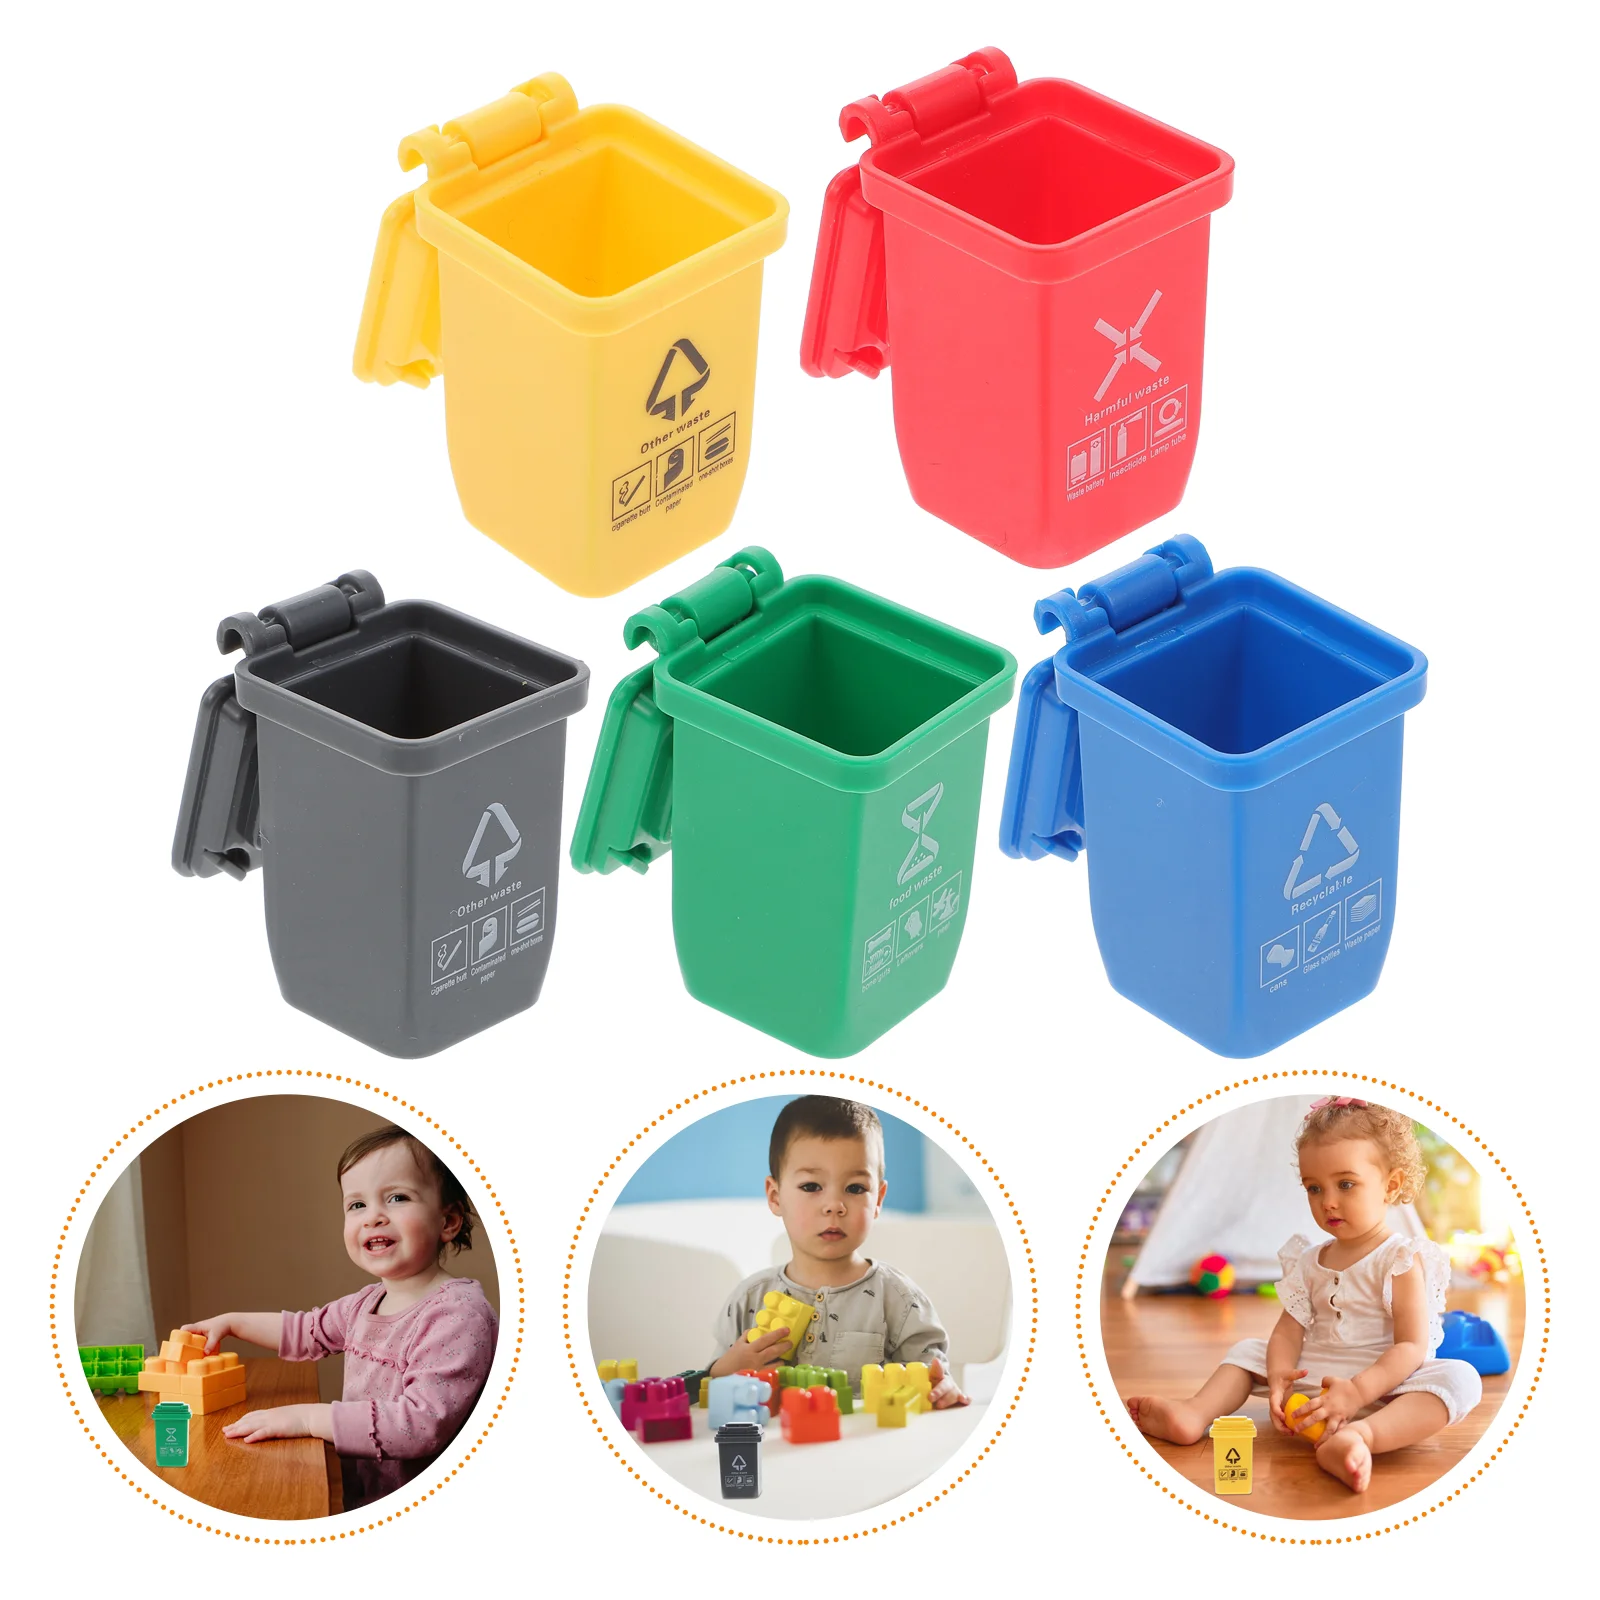 

5 Pcs Boys Toys Mini Trash Can House Sorting Garbage Bin Waste Container Small Miniature Dollhouse